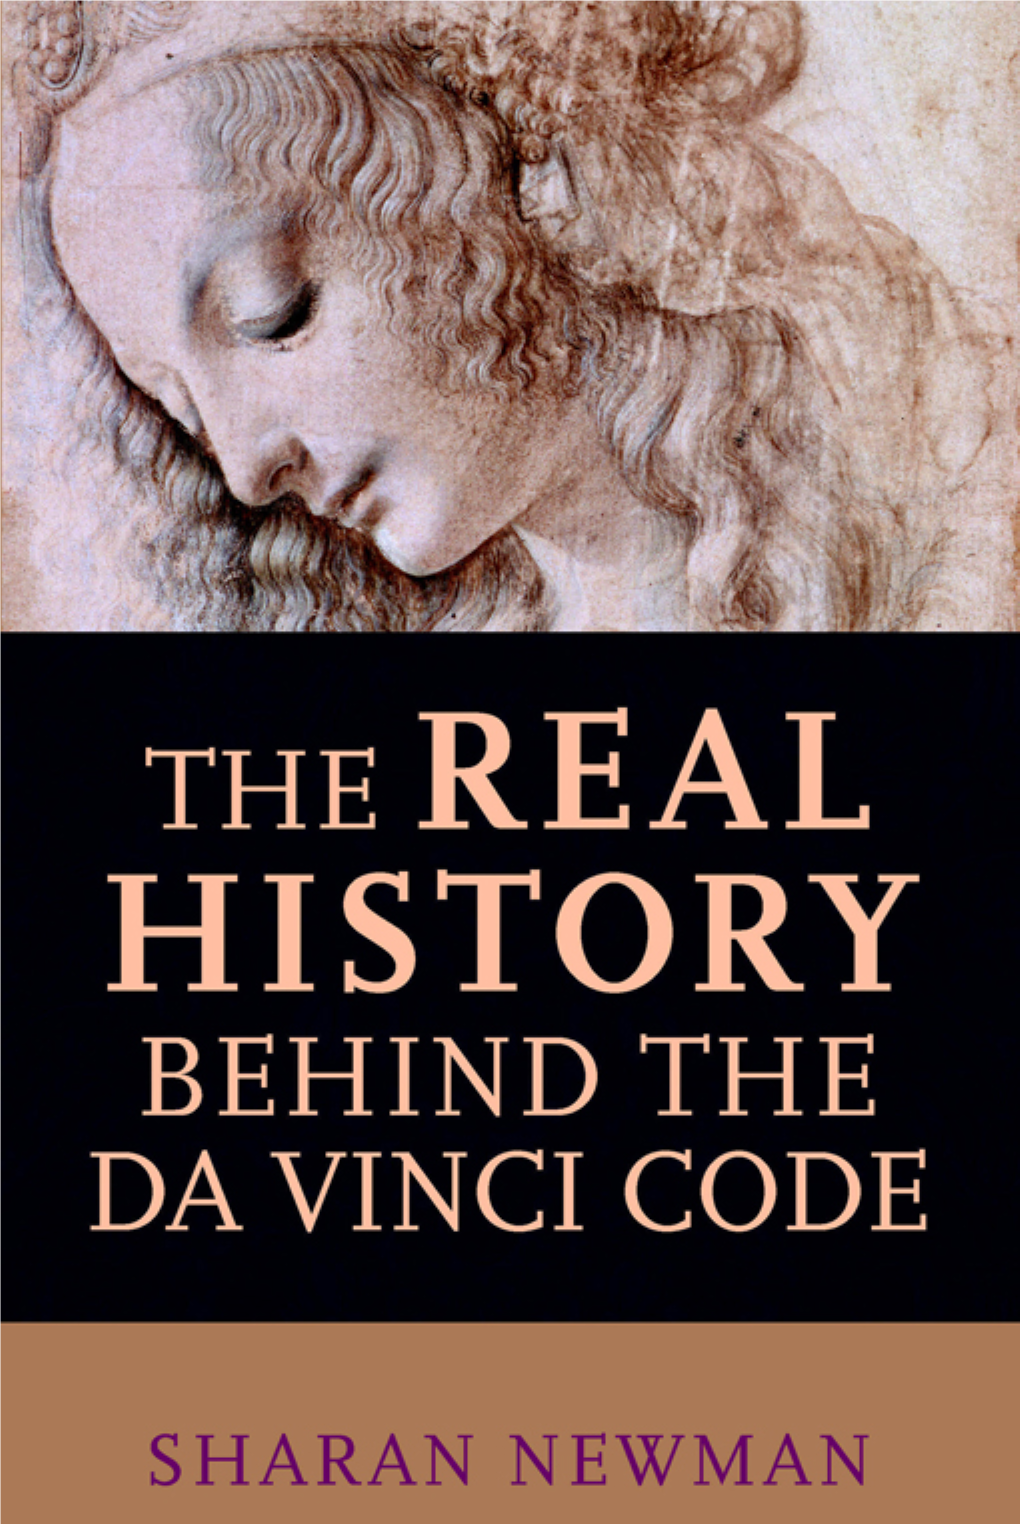 The Real History Behind the Da Vinci Code 24336 Ch00.I-Viii.Qxd 10/25/04 9:45 AM Page Ii 24336 Ch00.I-Viii.Qxd 10/25/04 9:45 AM Page Iii